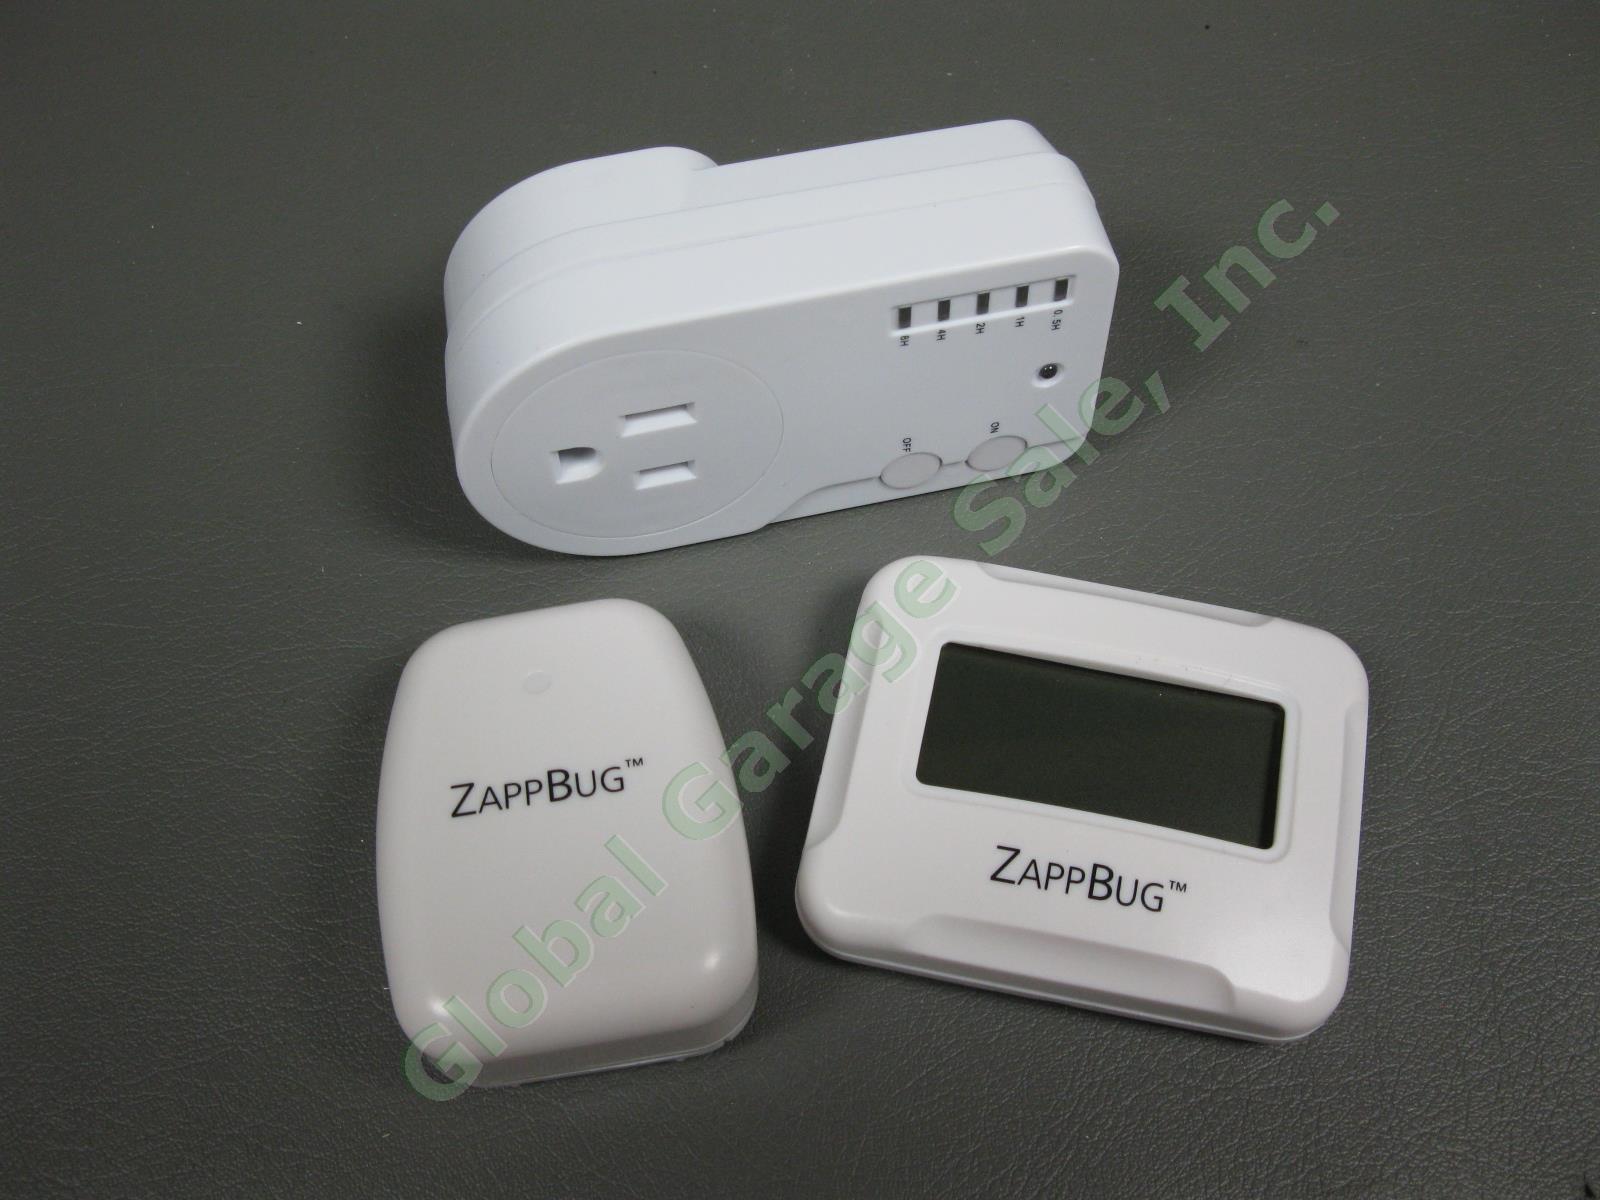 NEW ZappBug Heater Electric Bed Bug Killer Corded Home Insect Pest Control NIB 6